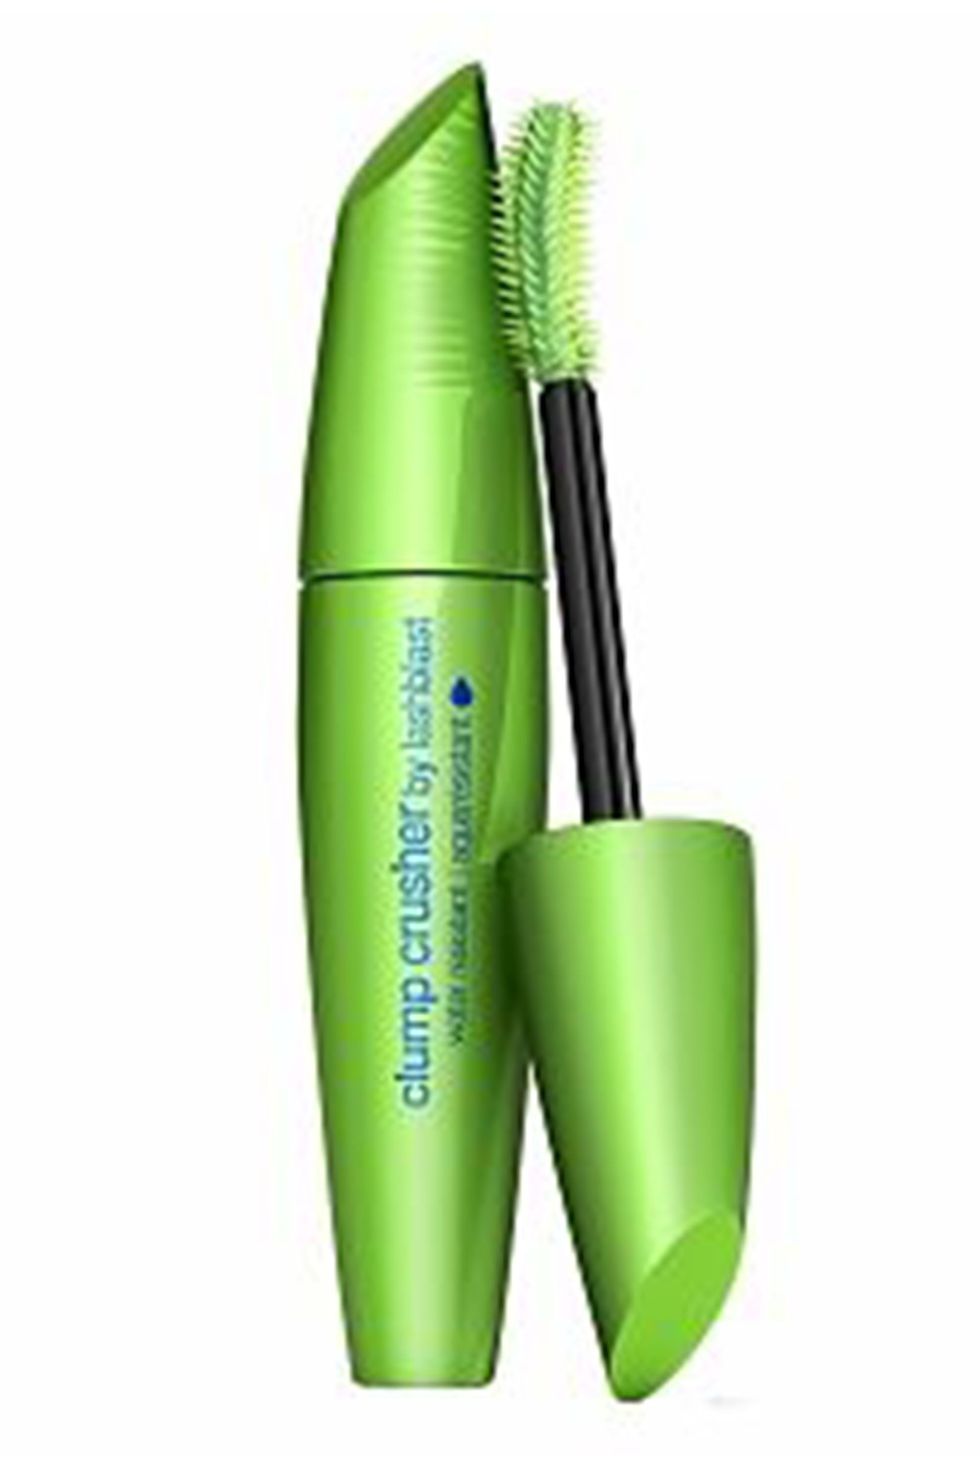 Best Waterproof Mascara of 2022 - Waterproof Mascaras You Can Swim and Cry In